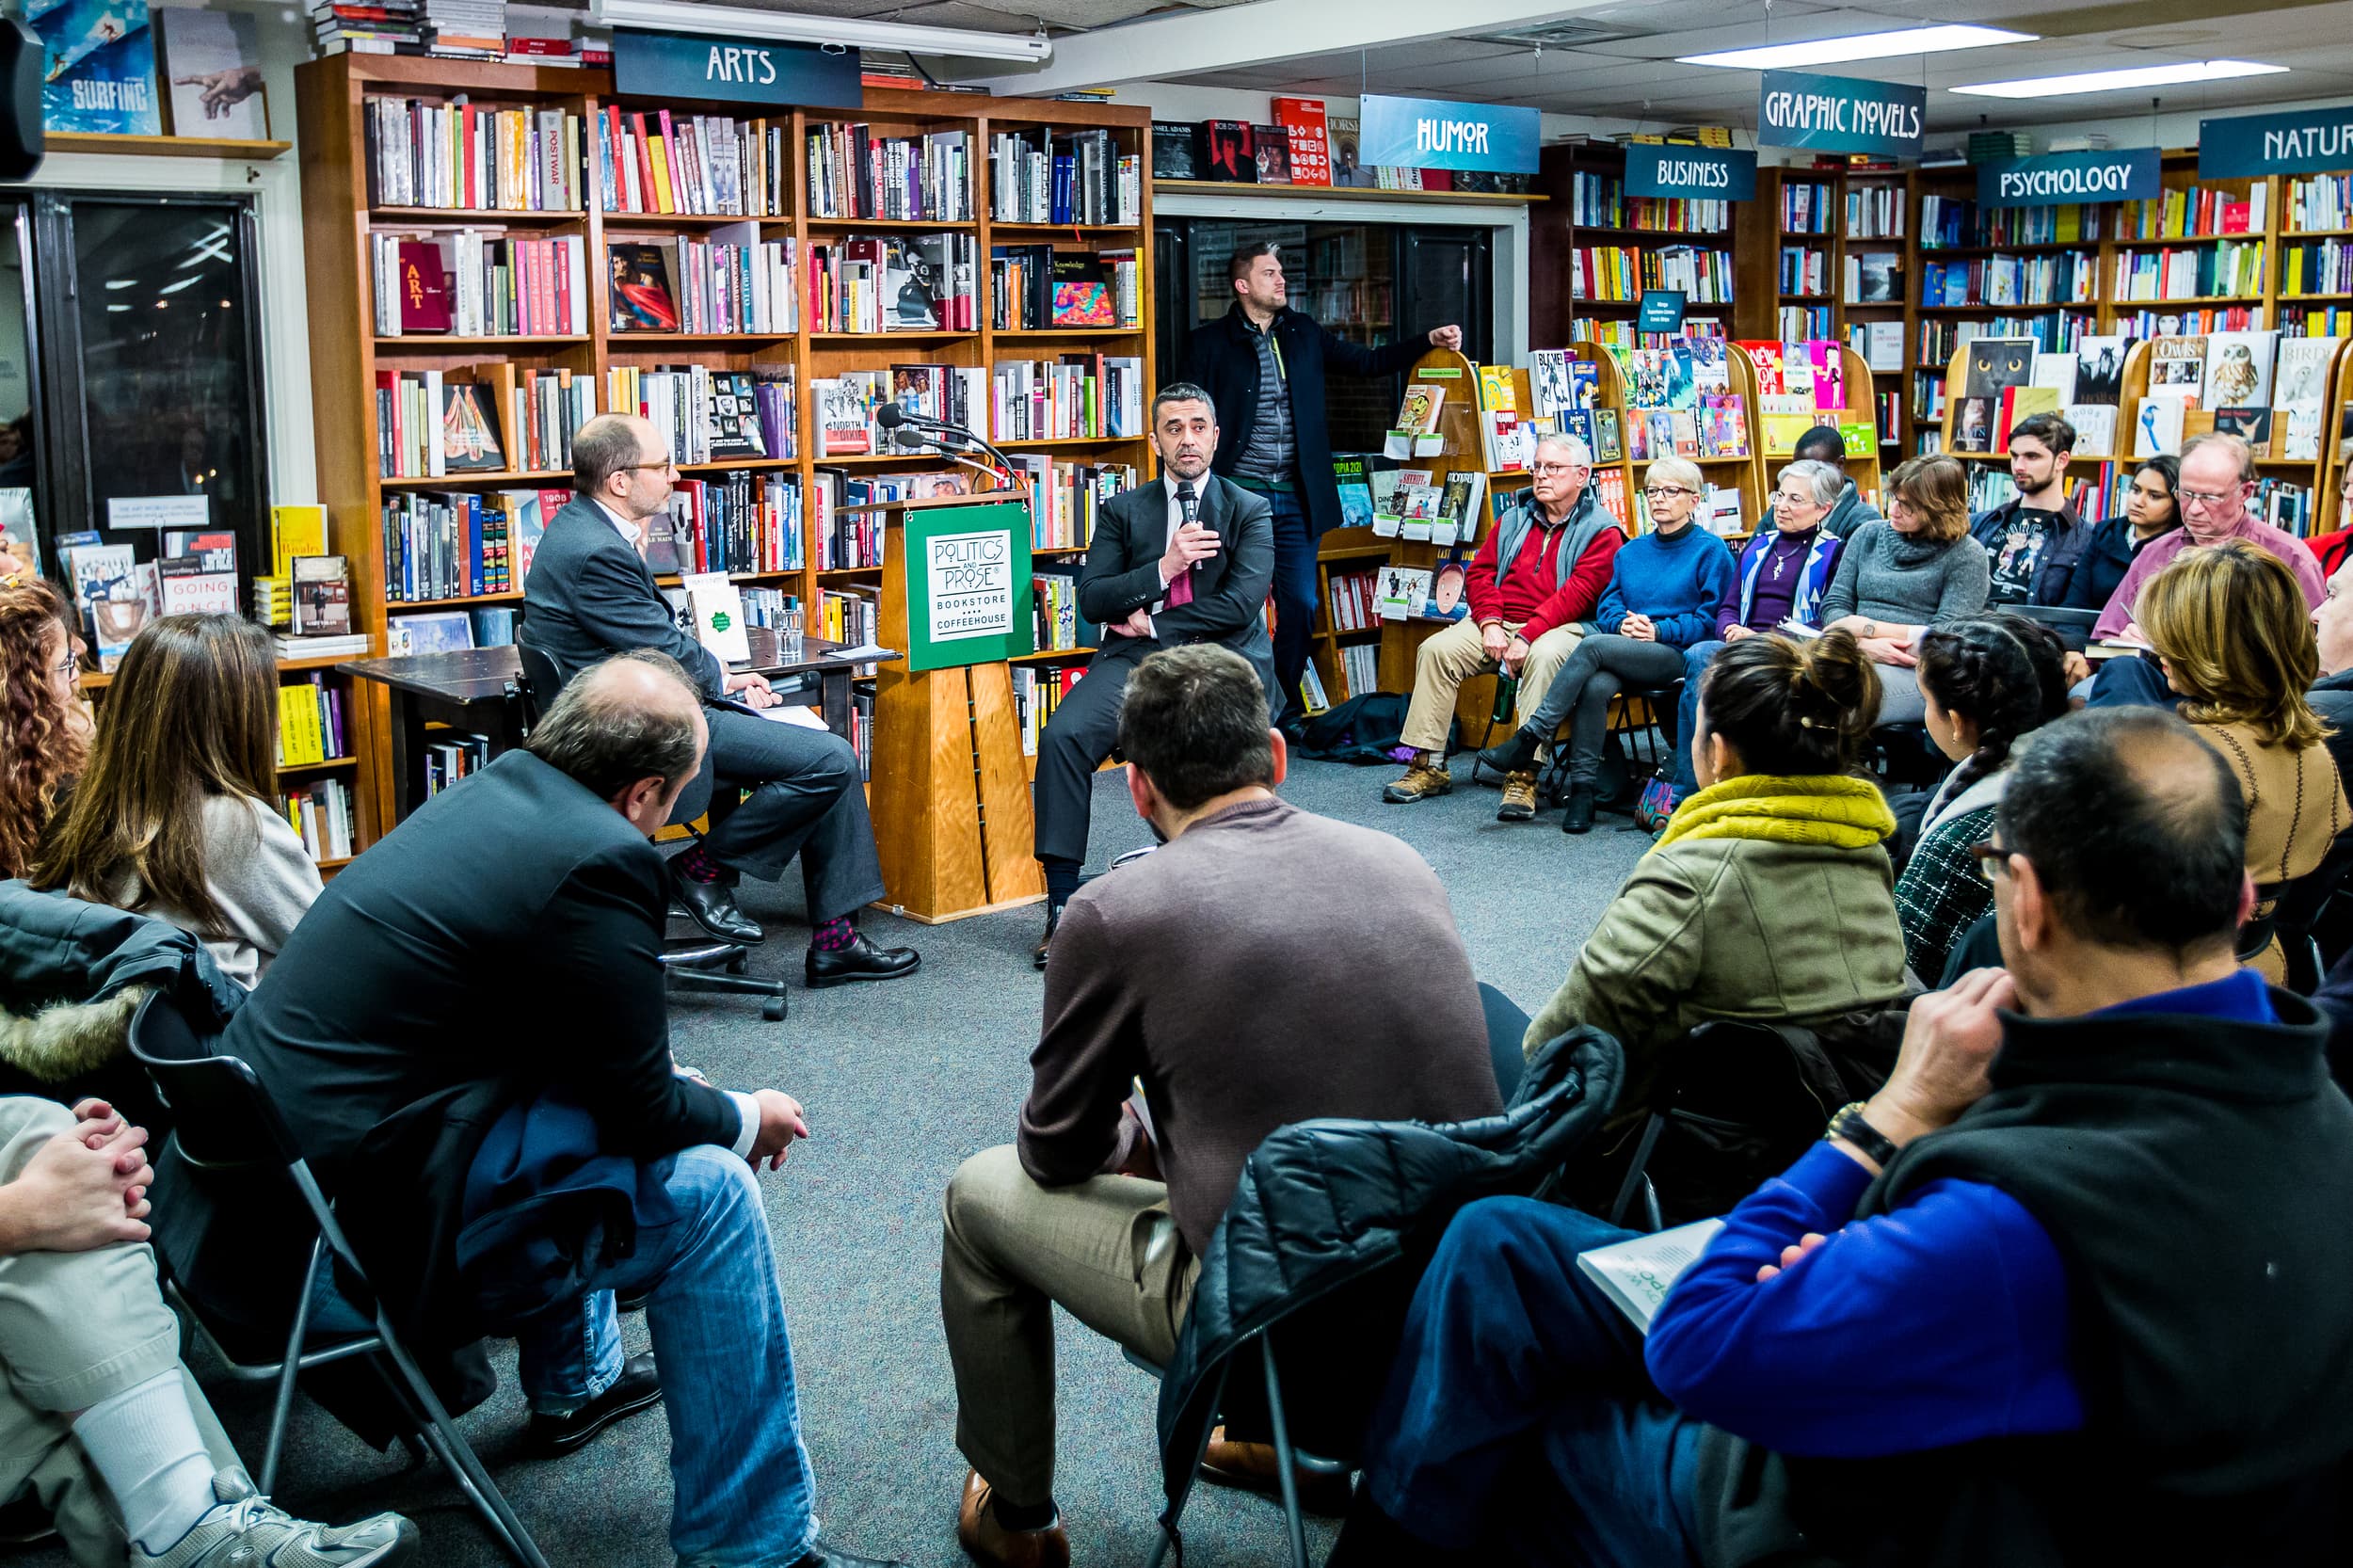 UAE Ambassador to France, Omar Ghobash discussing his new book, 'Letters to a Young Muslim' to a full house at Politics & Prose bookstore in Washington, DC